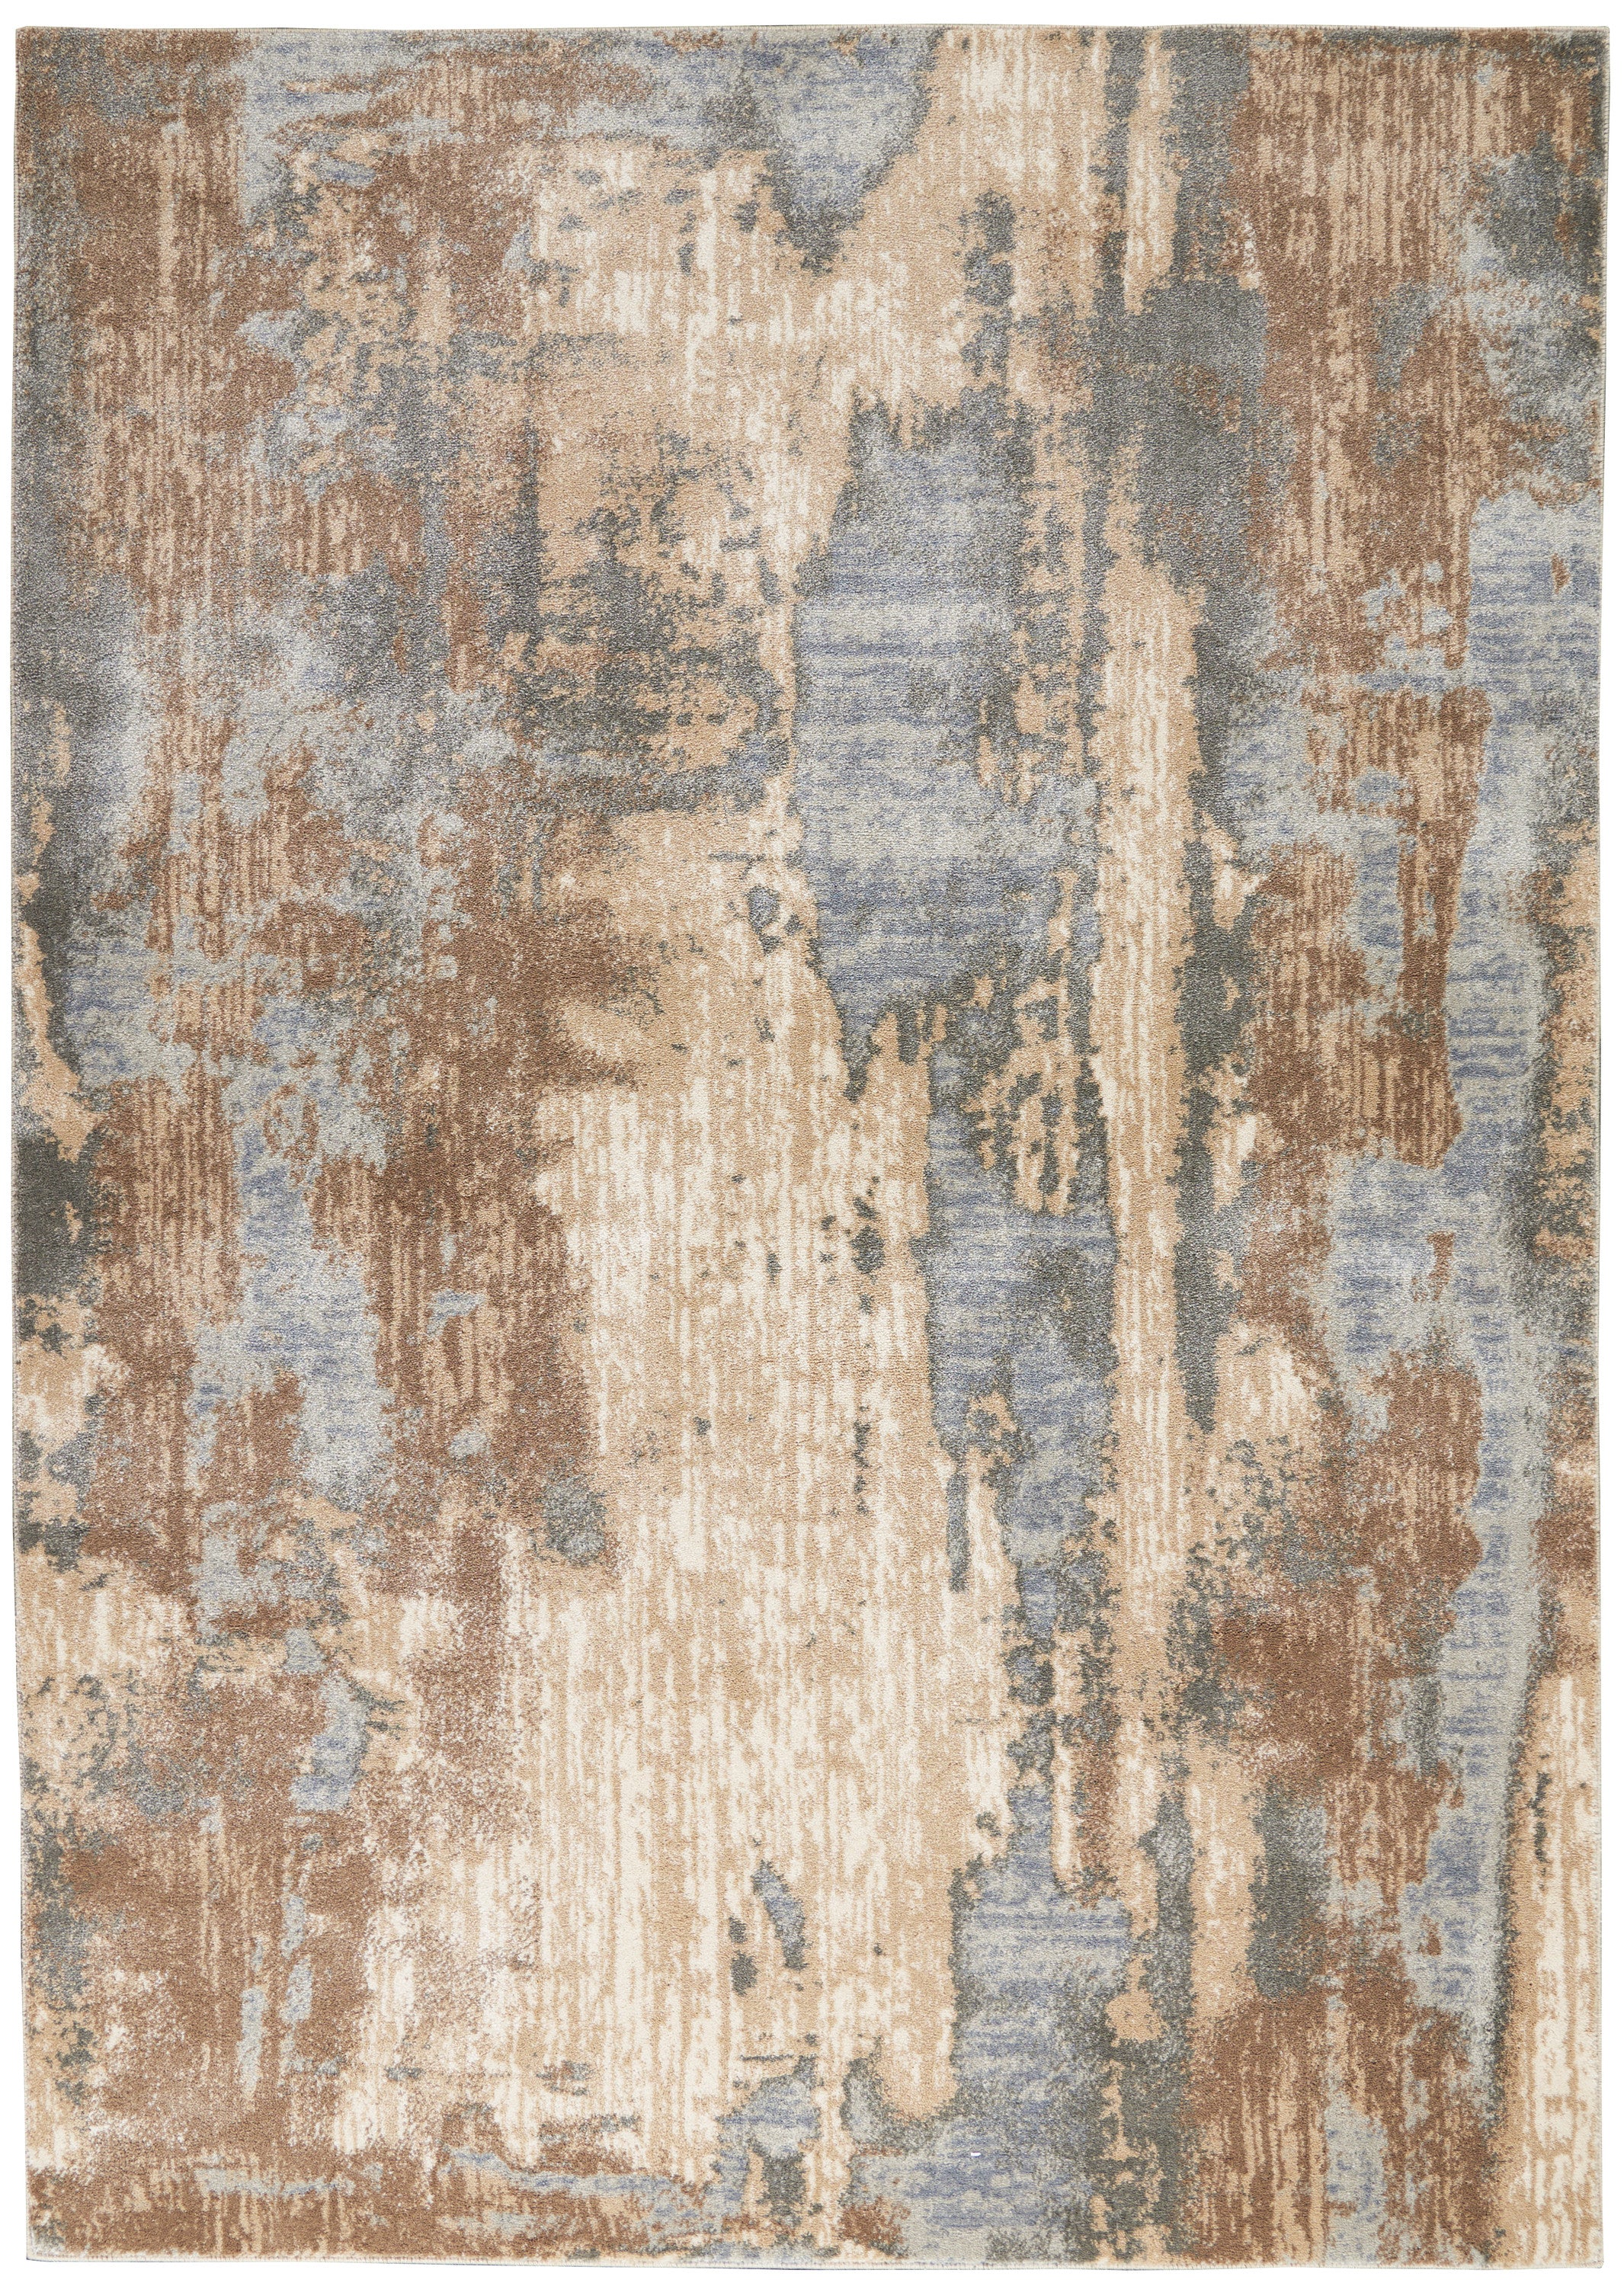 Distressed Industrial Style Abstract Rug